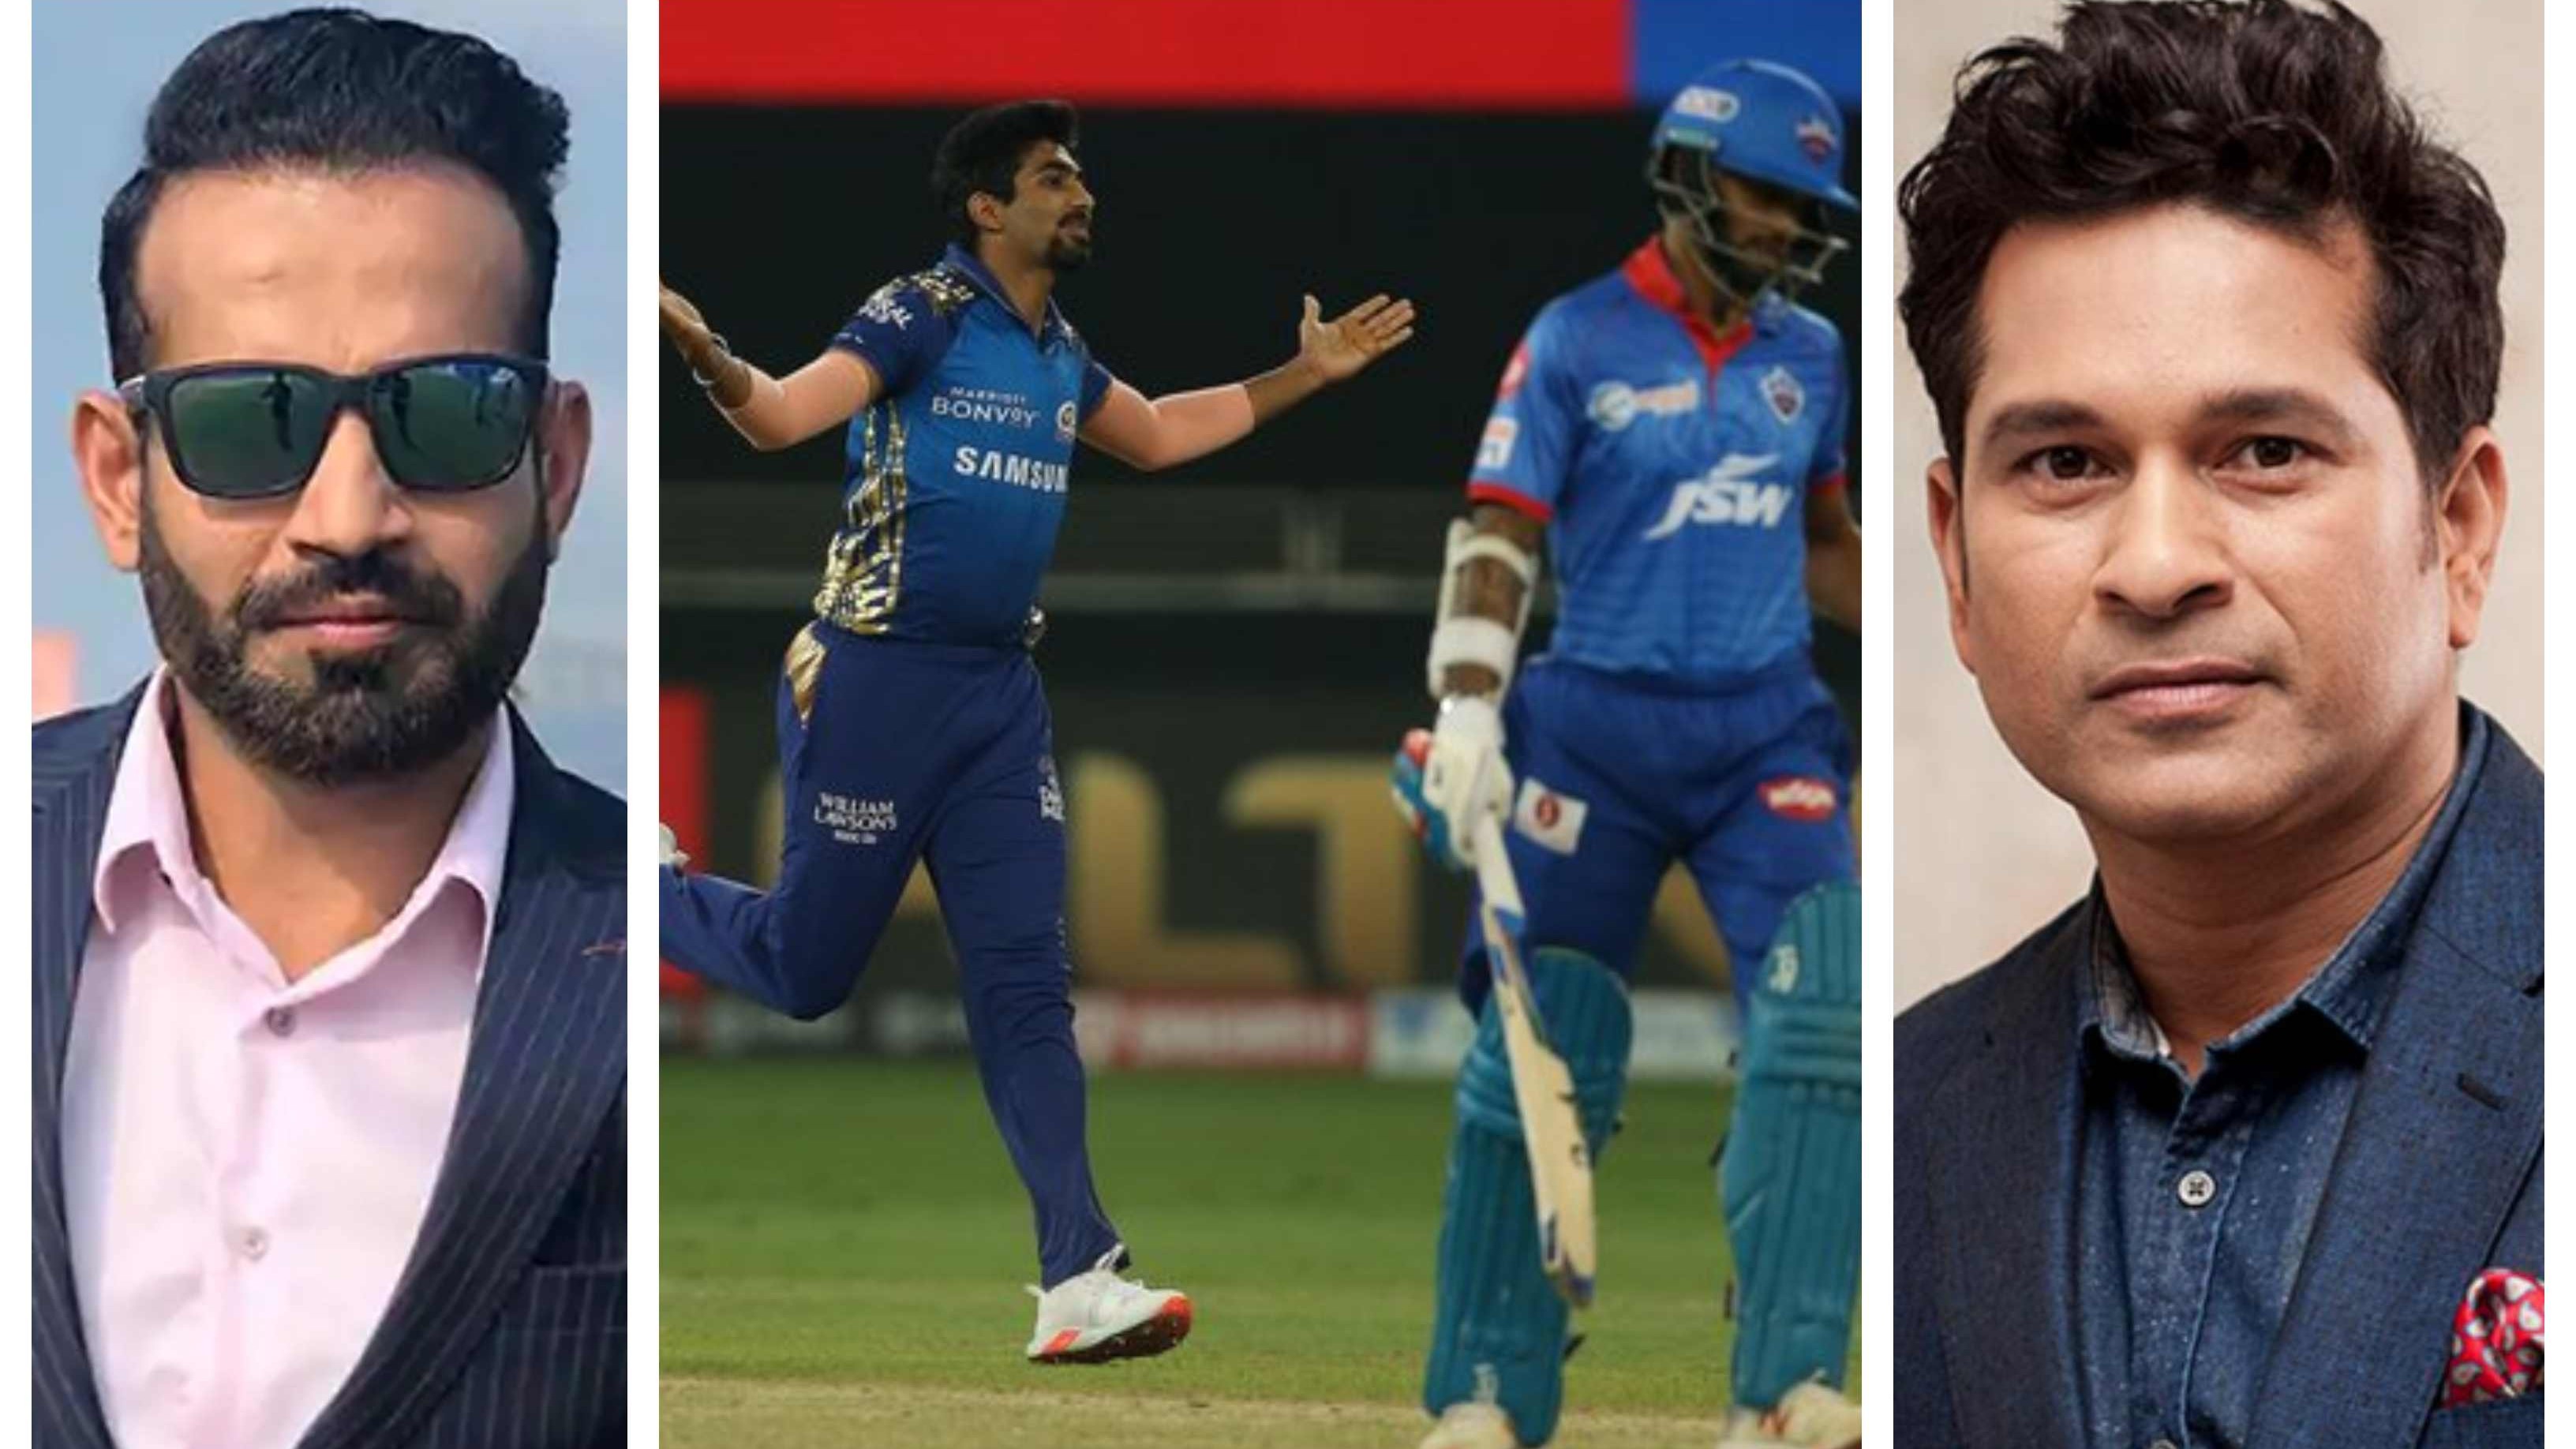 IPL 2020: Cricket fraternity reacts as Bumrah puts MI in the final with a heroic spell against DC in Qualifier 1